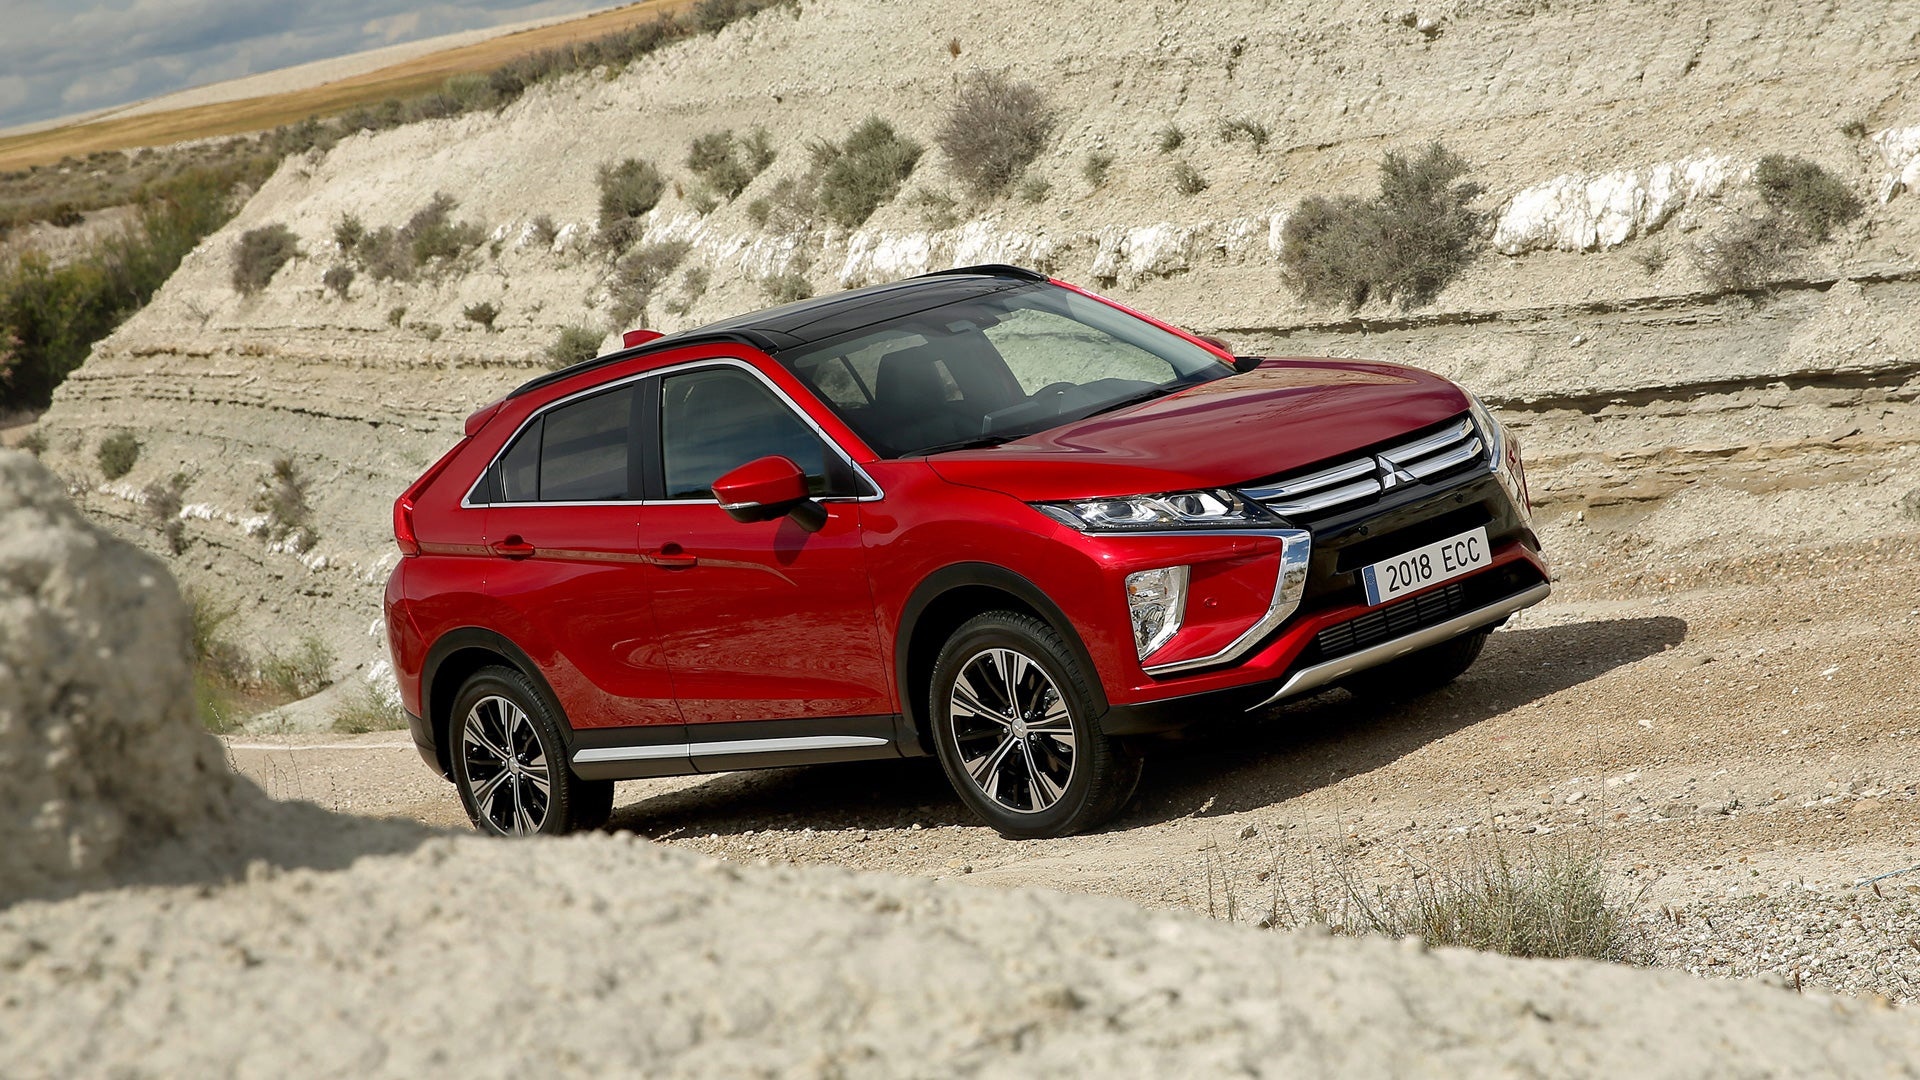 Mitsubishi Eclipse Cross, With and without mut, NZZ, Intriguing details, 1920x1080 Full HD Desktop